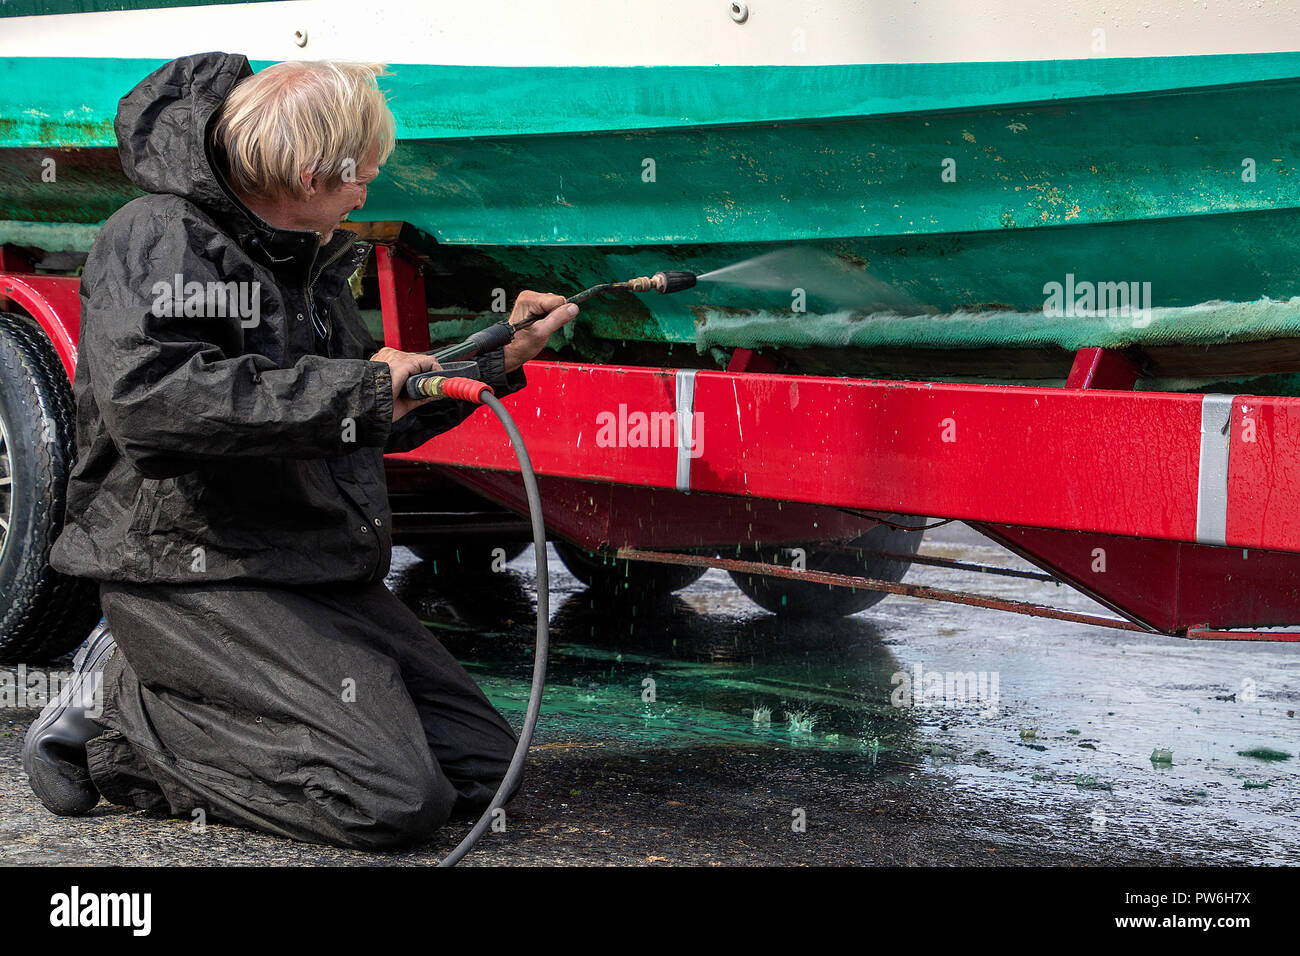 Caucasian man kneeling while high pressure washing dirty boat hull on red trailer Stock Photo